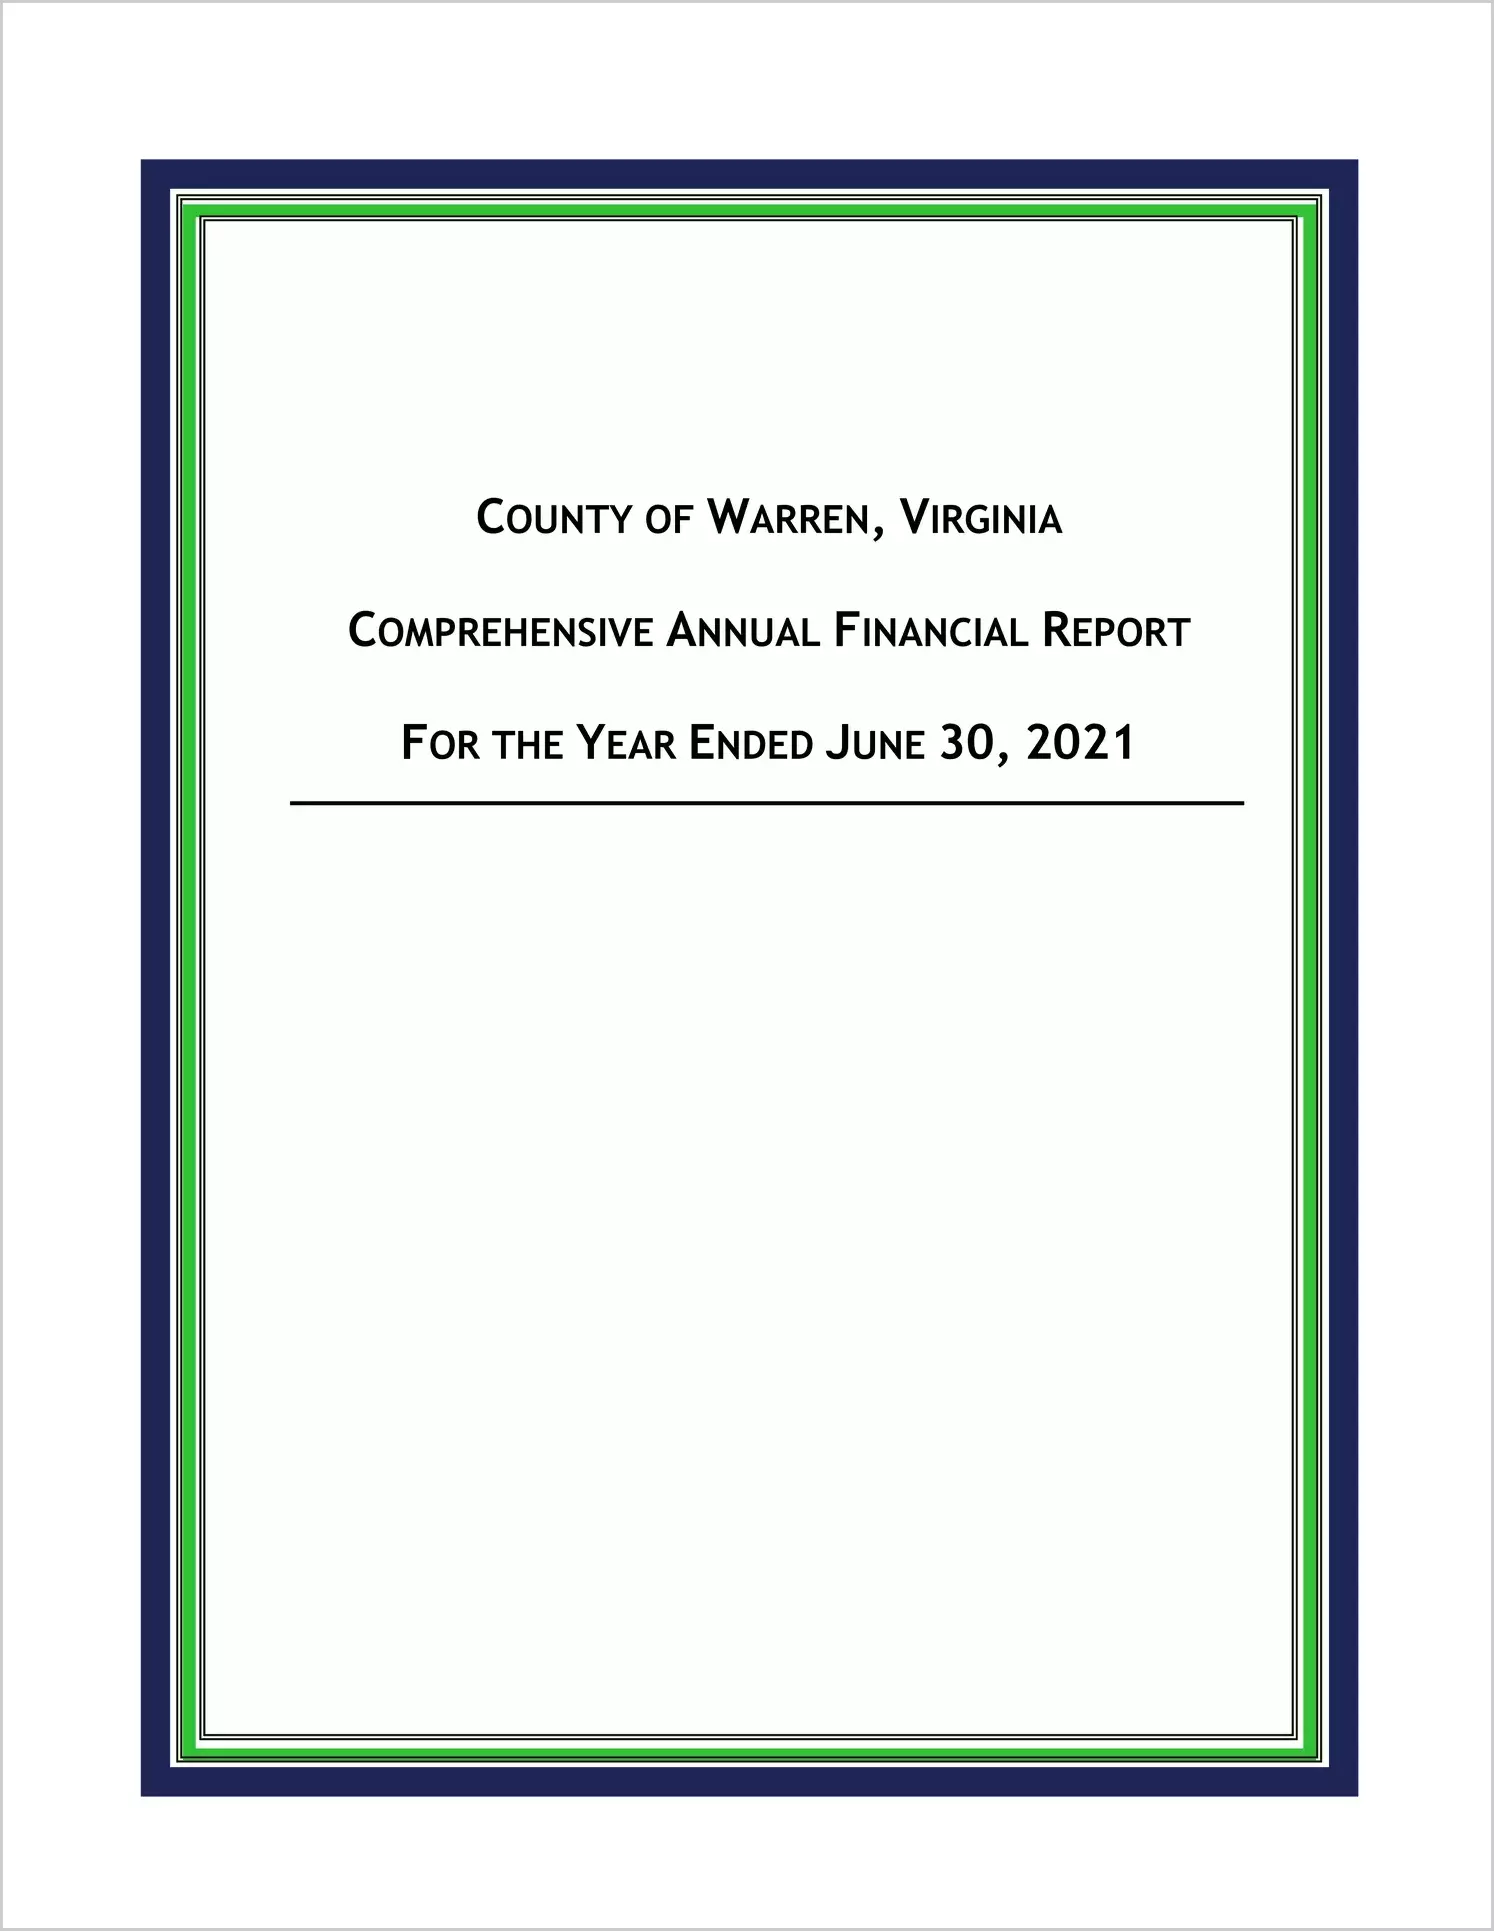 2021 Annual Financial Report for County of Warren